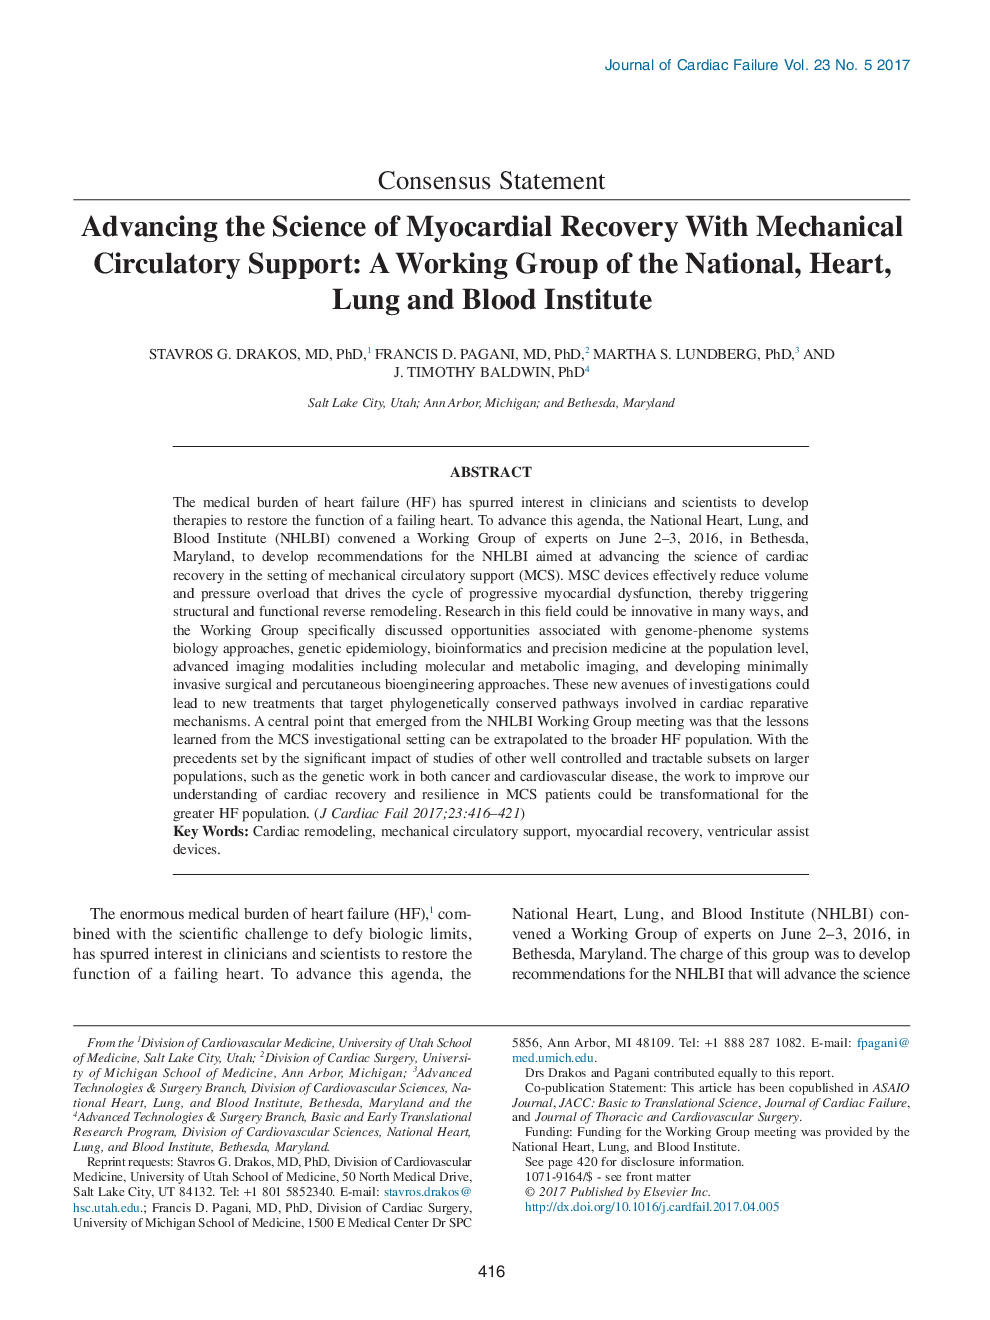 Advancing the Science of Myocardial Recovery With Mechanical Circulatory Support: A Working Group of the National, Heart, Lung and Blood Institute